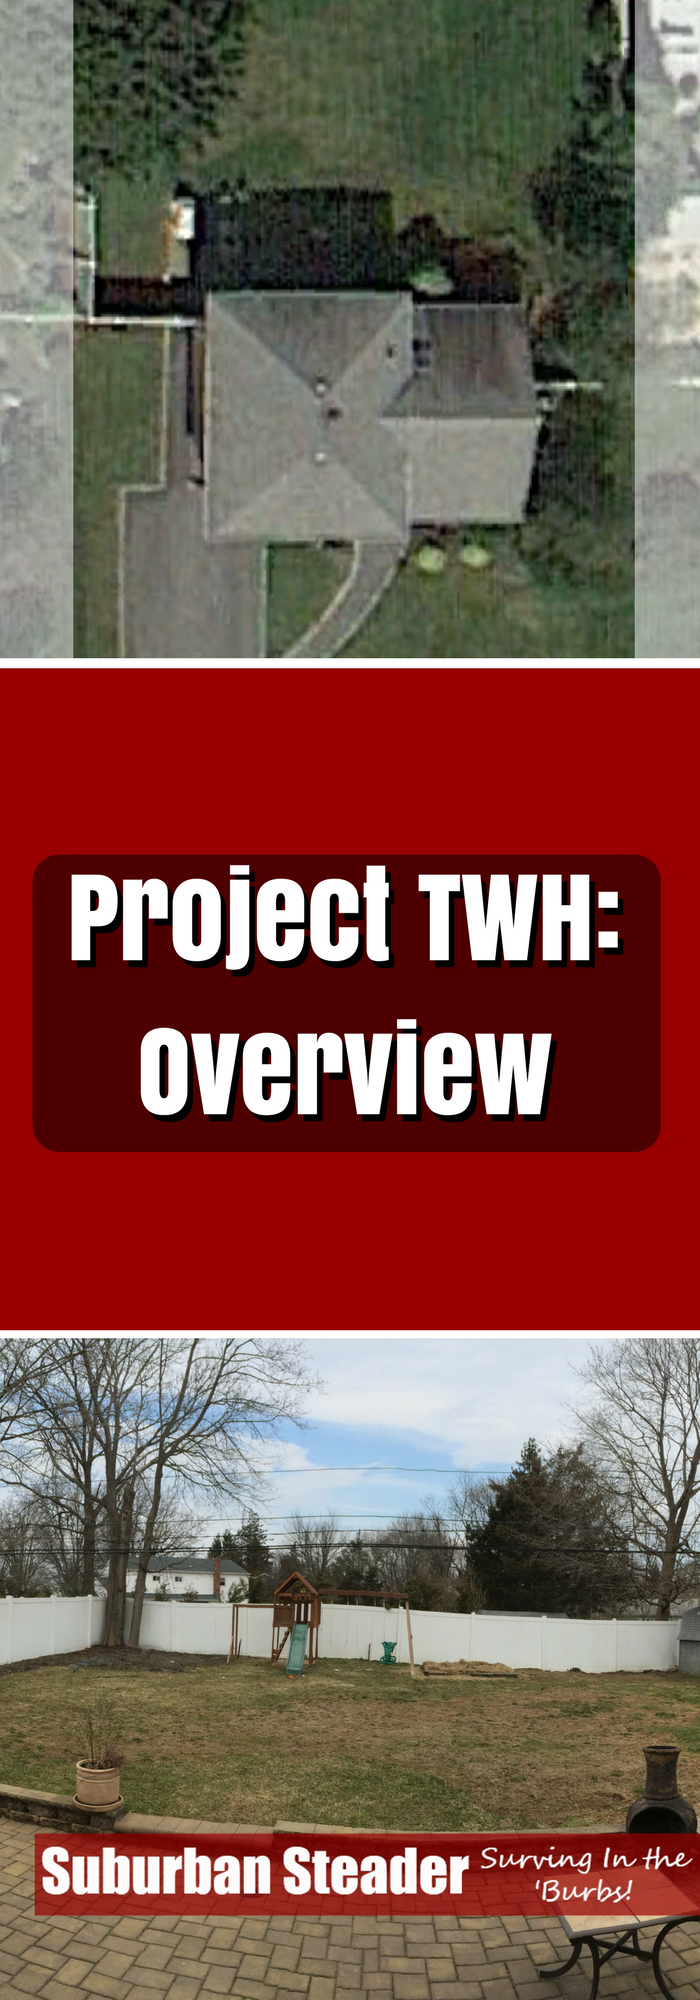 Project TWH